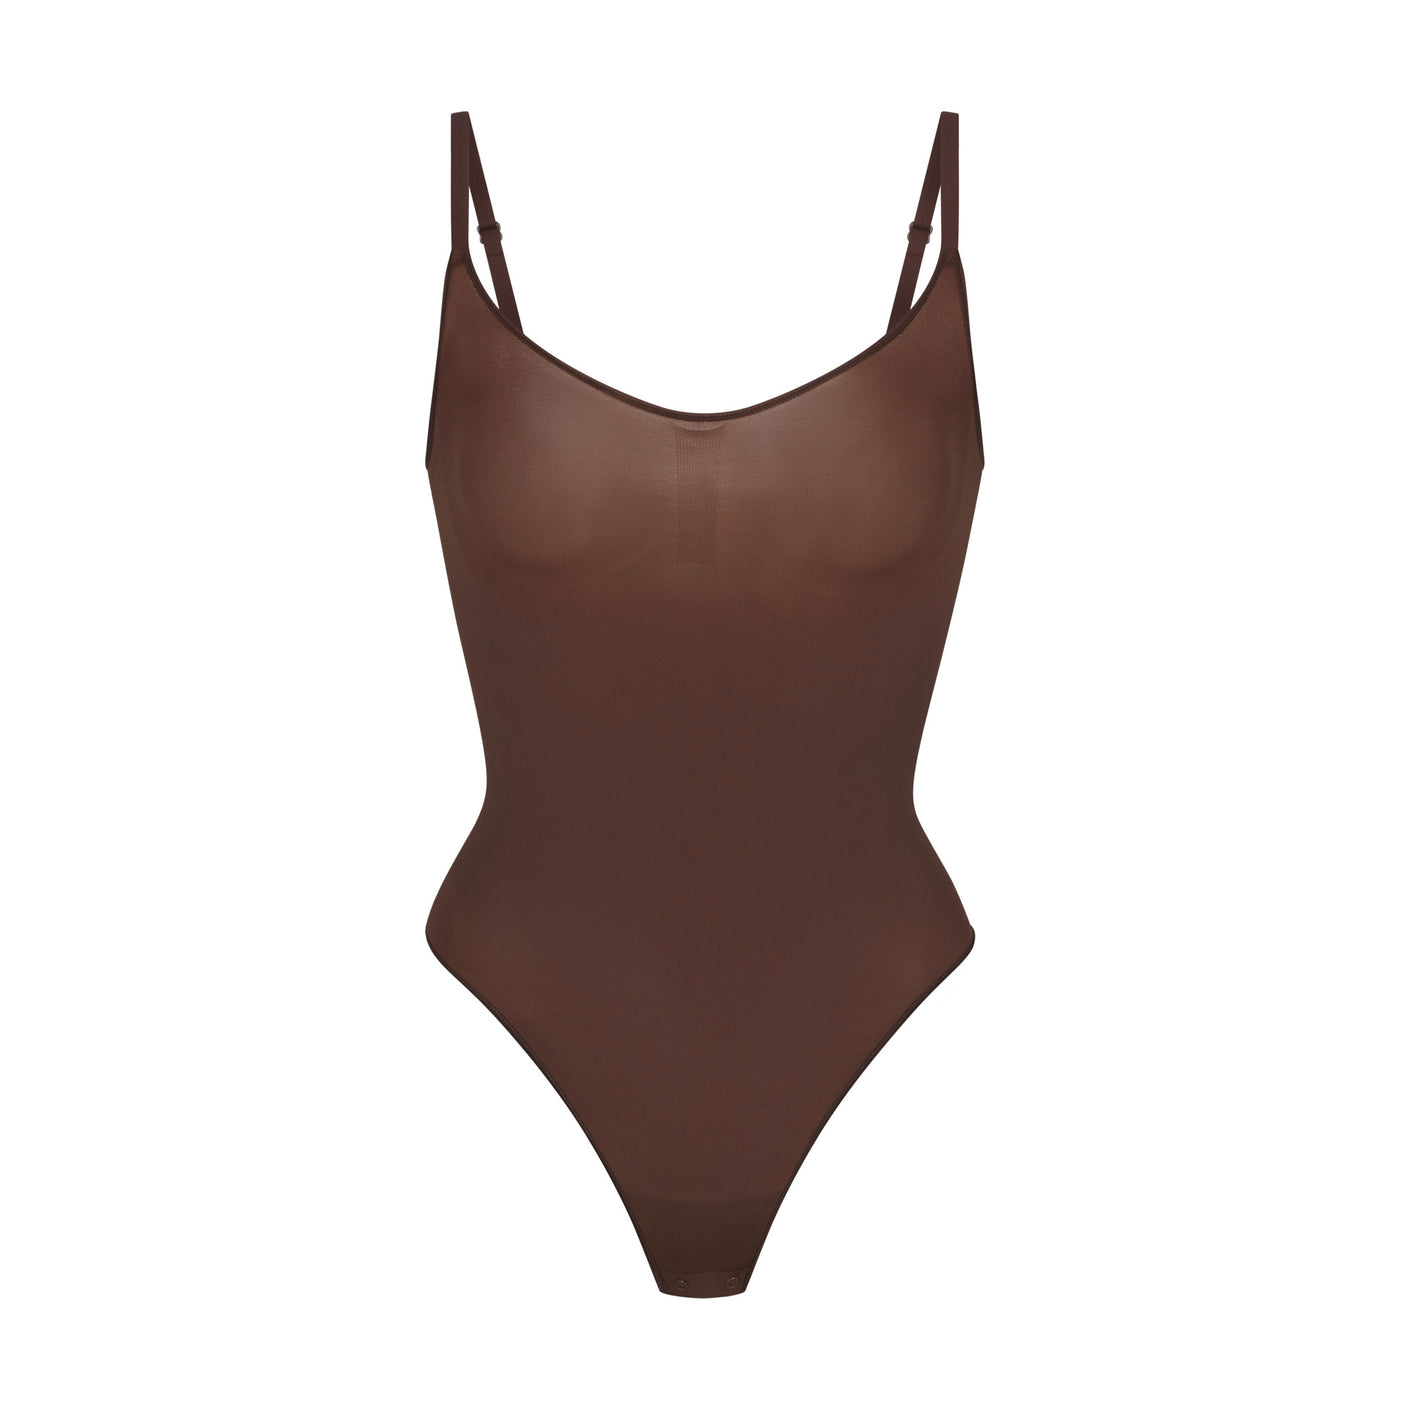 COCOA ‘Fits Everybody’ High Neck Bodysuit